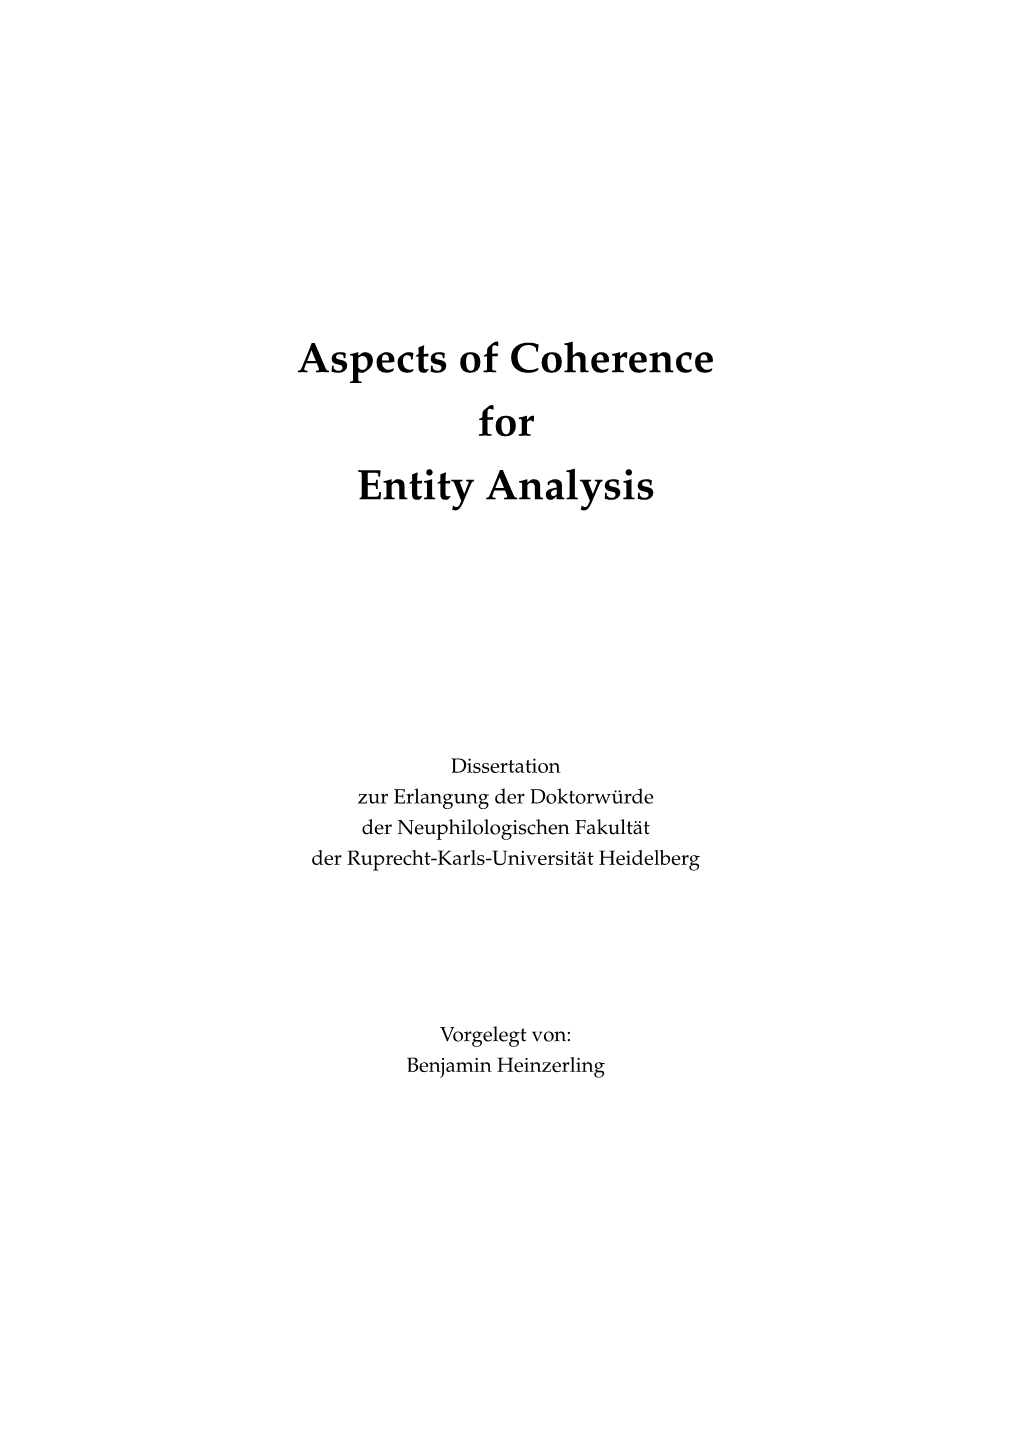 Aspects of Coherence for Entity Analysis